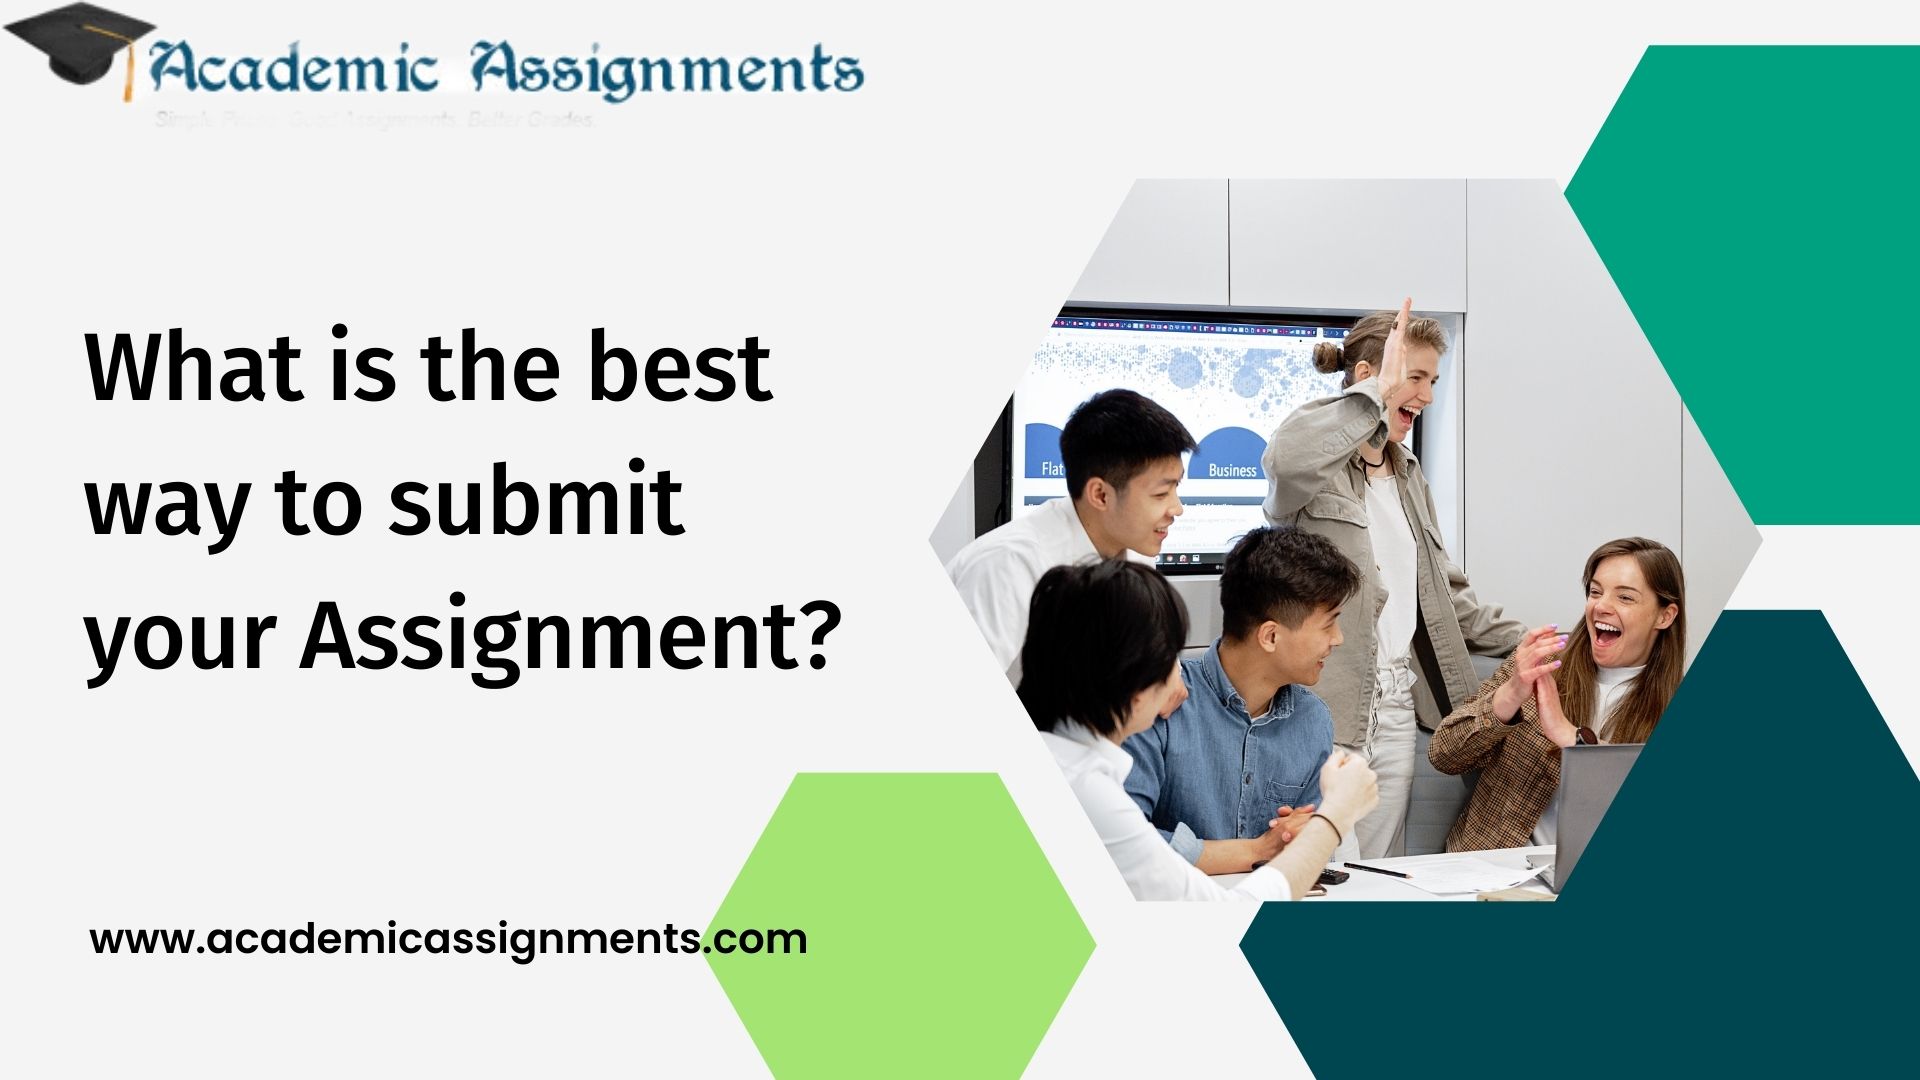 What is the best way to submit your Assignment